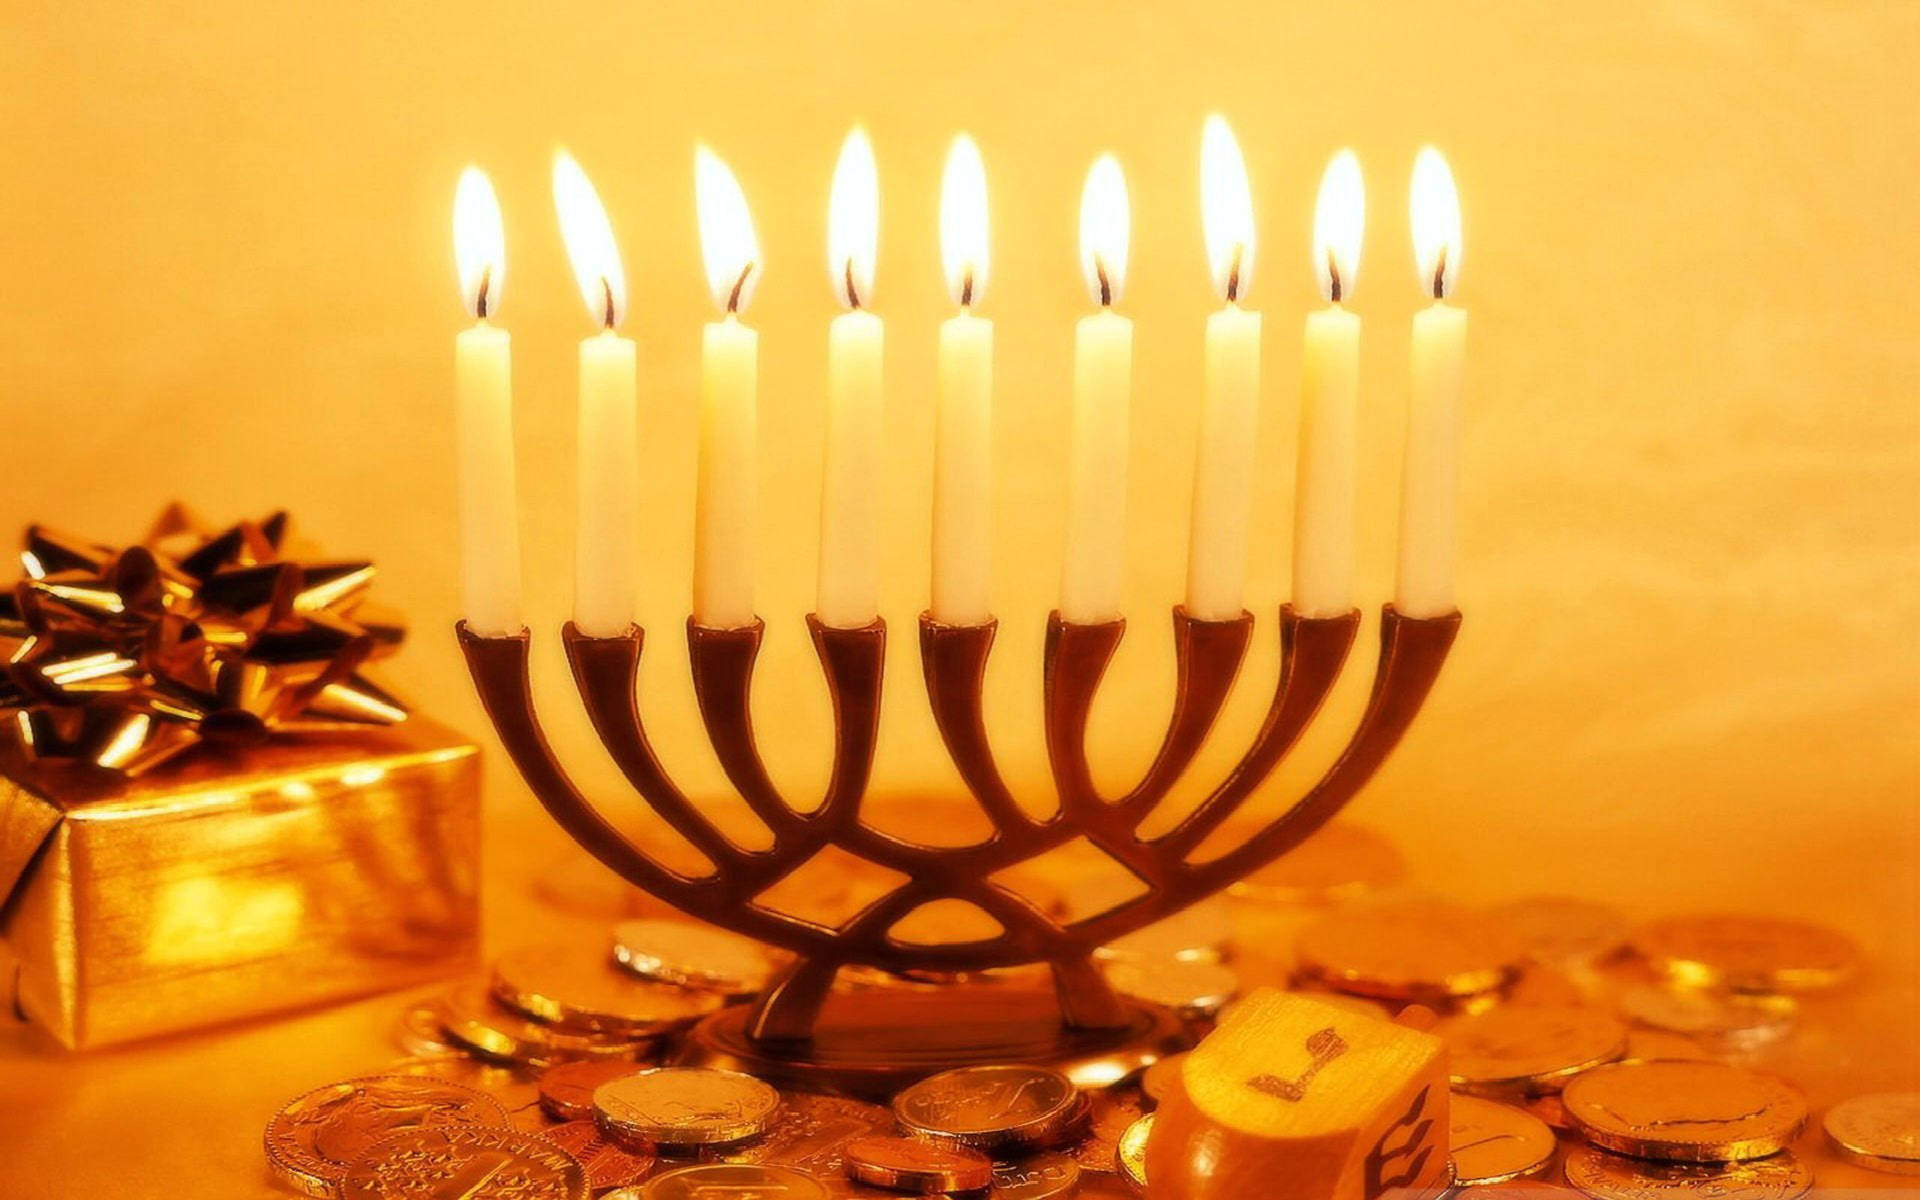 Caption: Illuminating Hanukkah Celebration With Traditional Coins And Candles